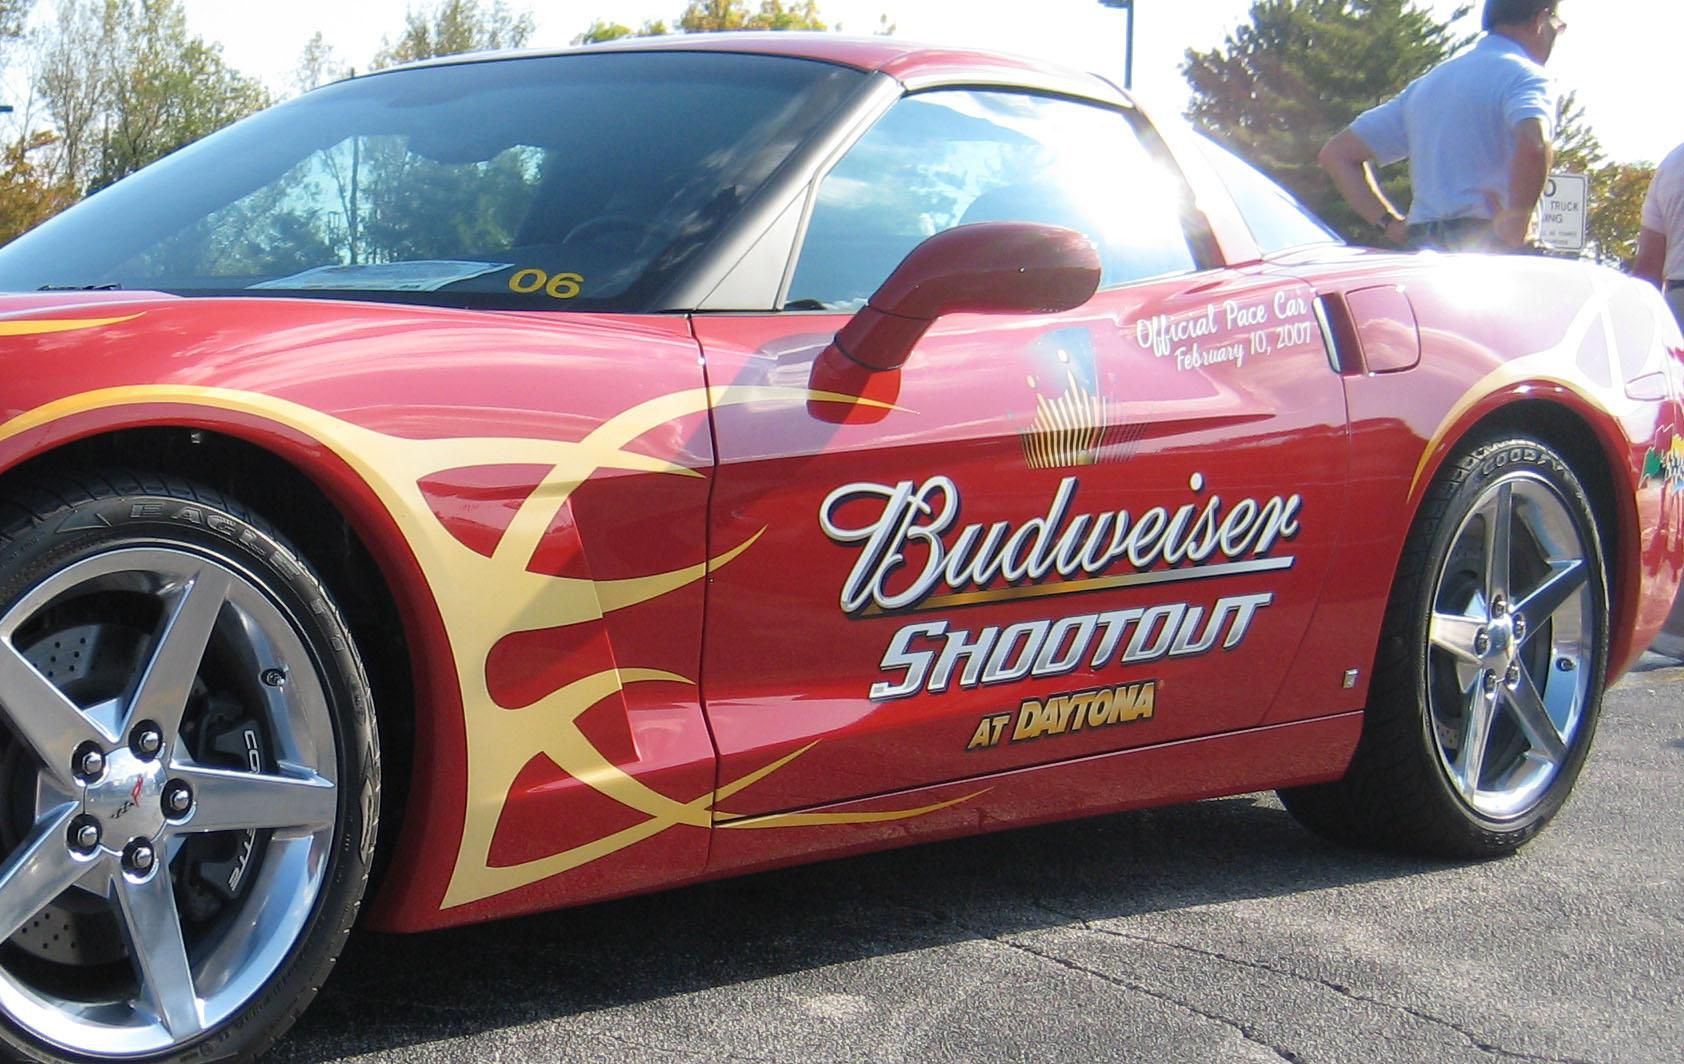 What Is the NASCAR Budweiser Shootout?